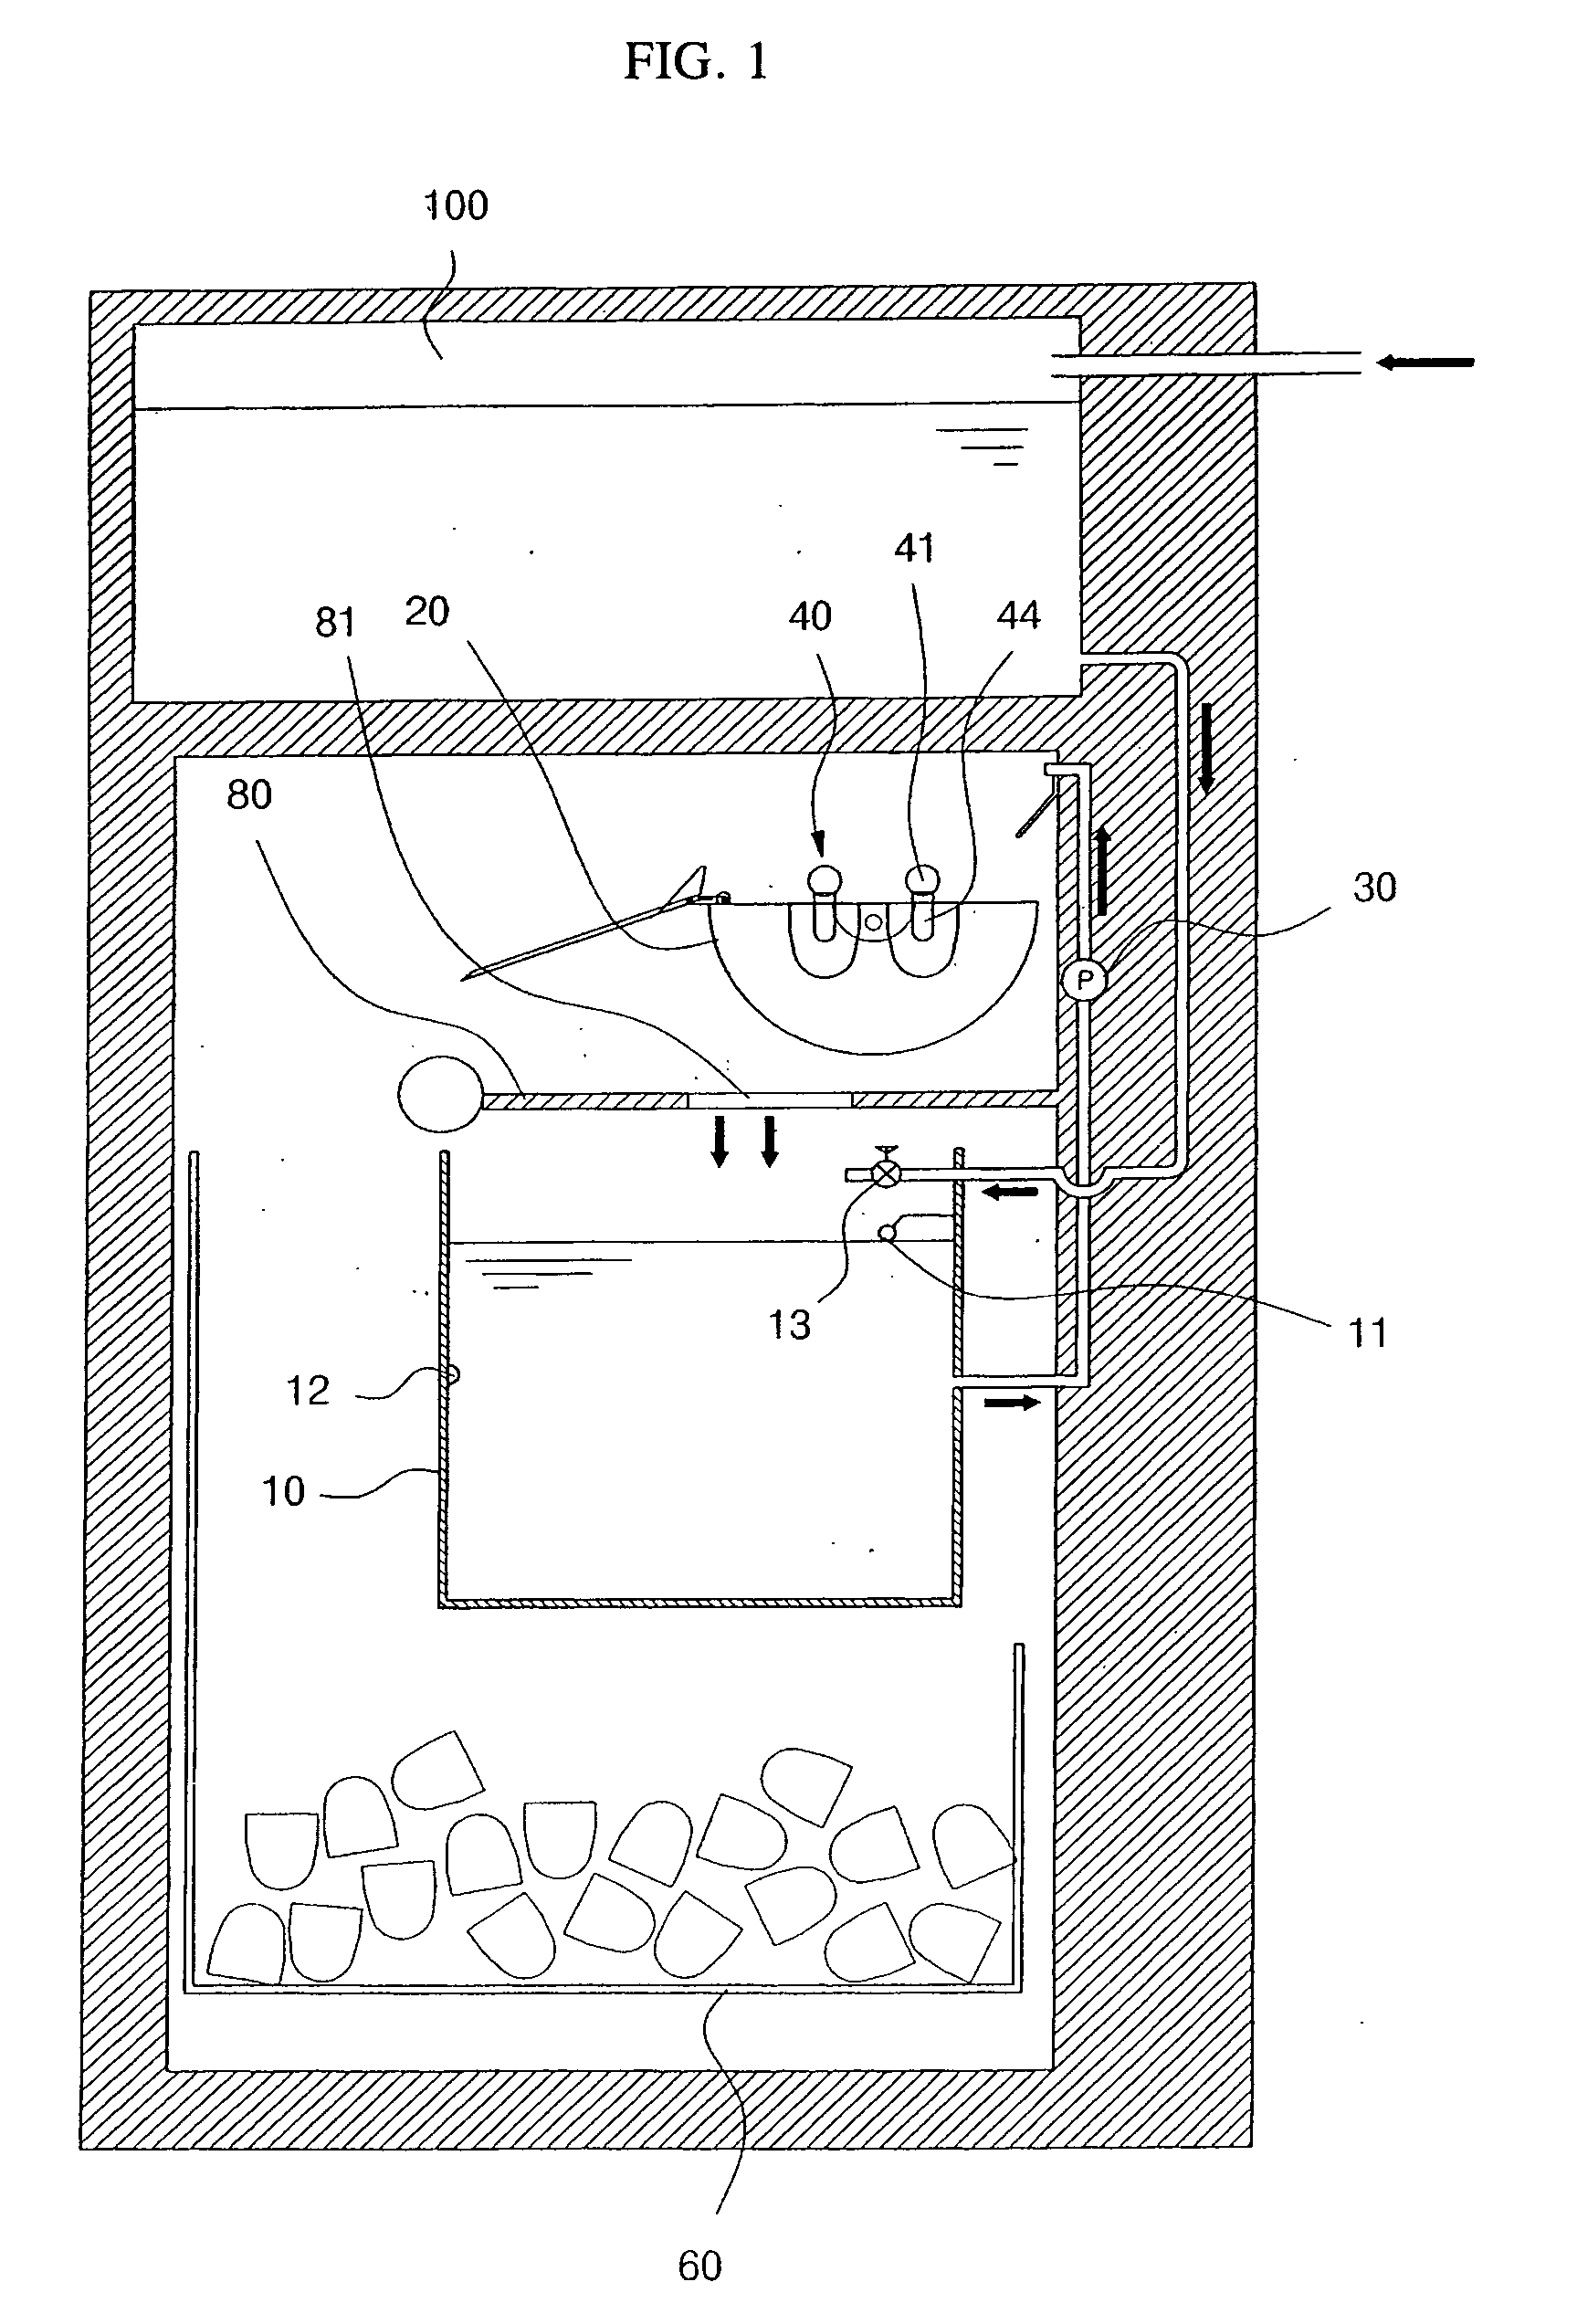 Water purifying system and apparatus for simultaneously making ice and cold water using one evaporator